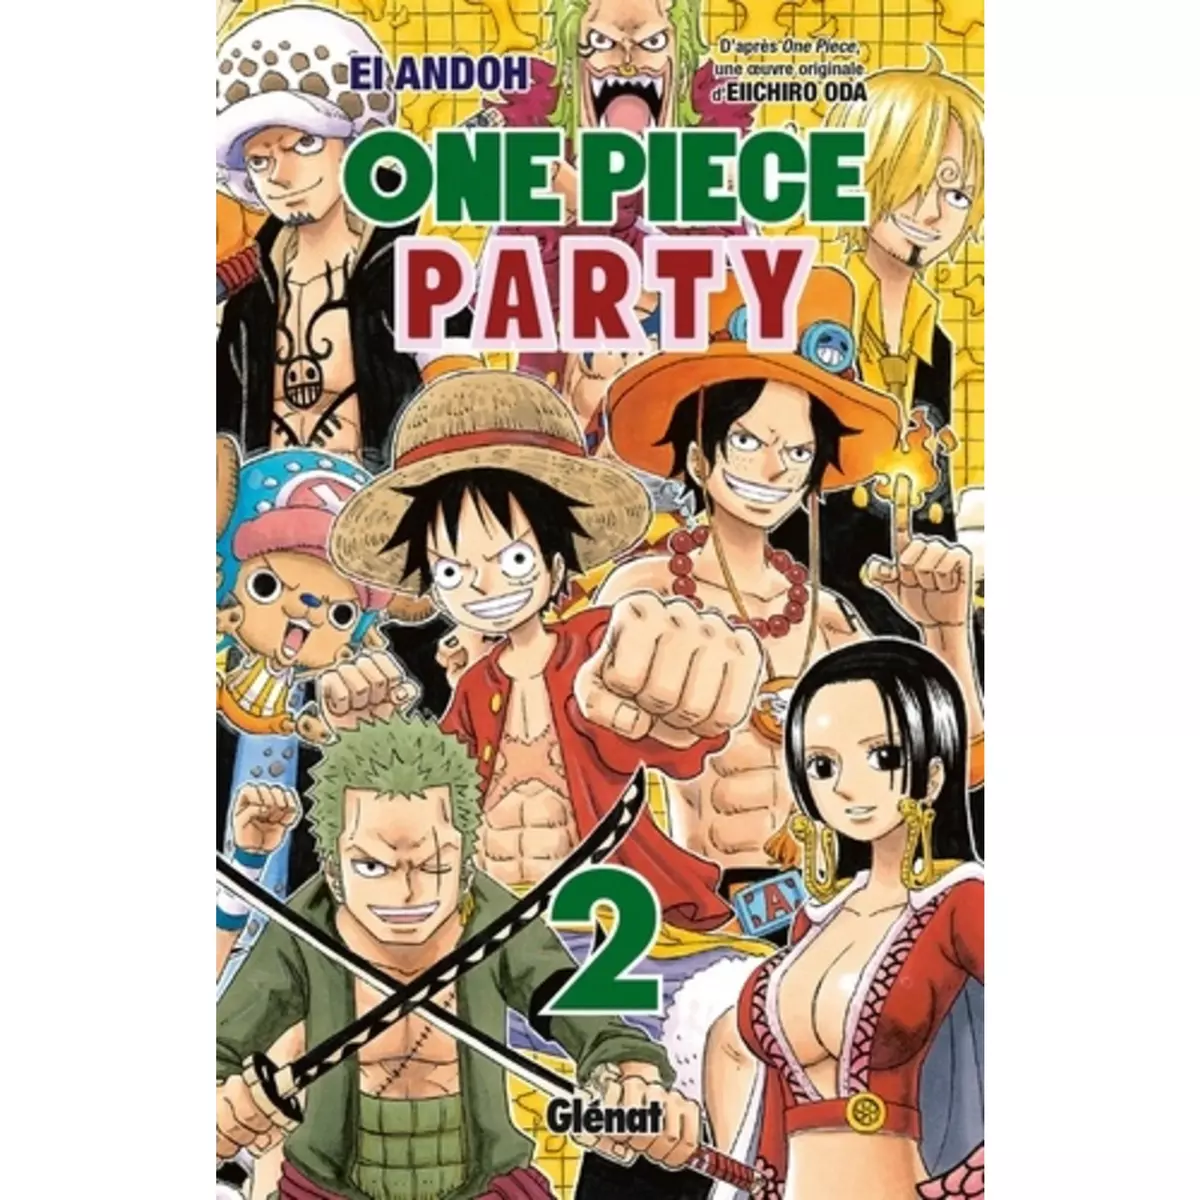  ONE PIECE PARTY TOME 2, Andoh Ei